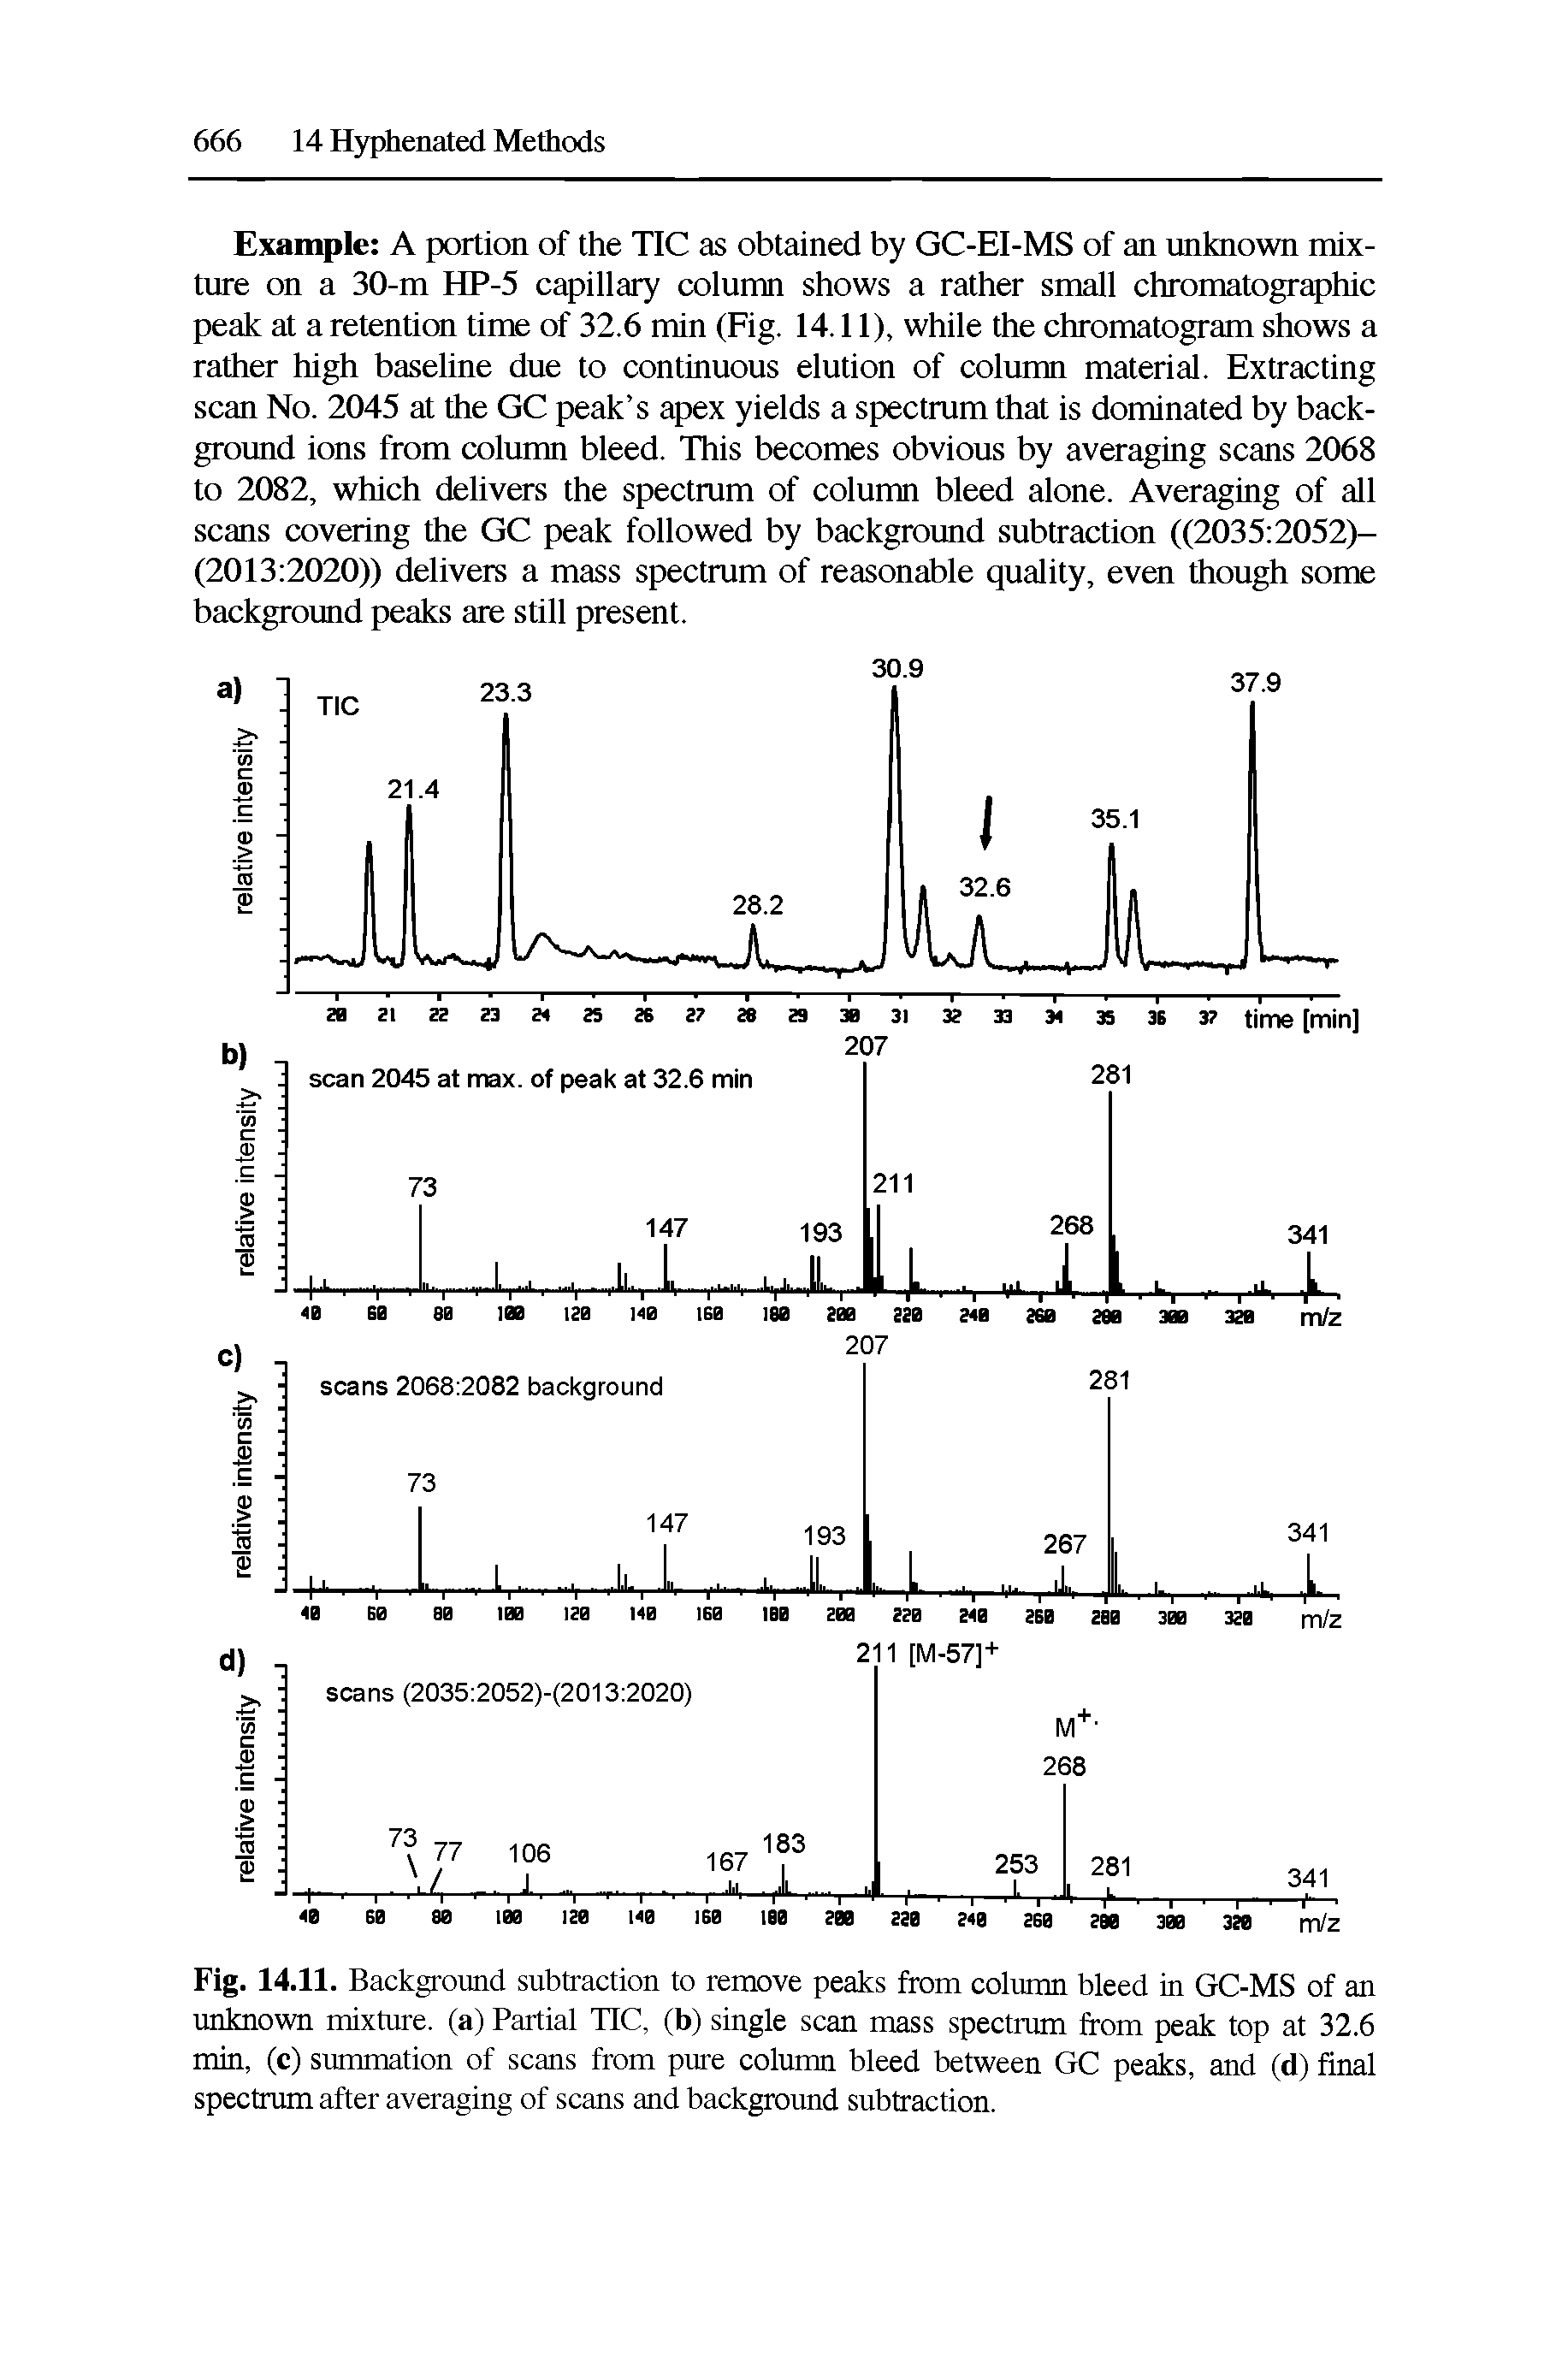 Fig. 14.11. Background subtraction to remove peaks from column bleed in GC-MS of an unknown mixture, (a) Partial TIC, (b) single scan mass spectrum from peak top at 32.6 min, (c) summation of scans from pure column bleed between GC peaks, and (d) final spectrum after averaging of scans and background subtraction.